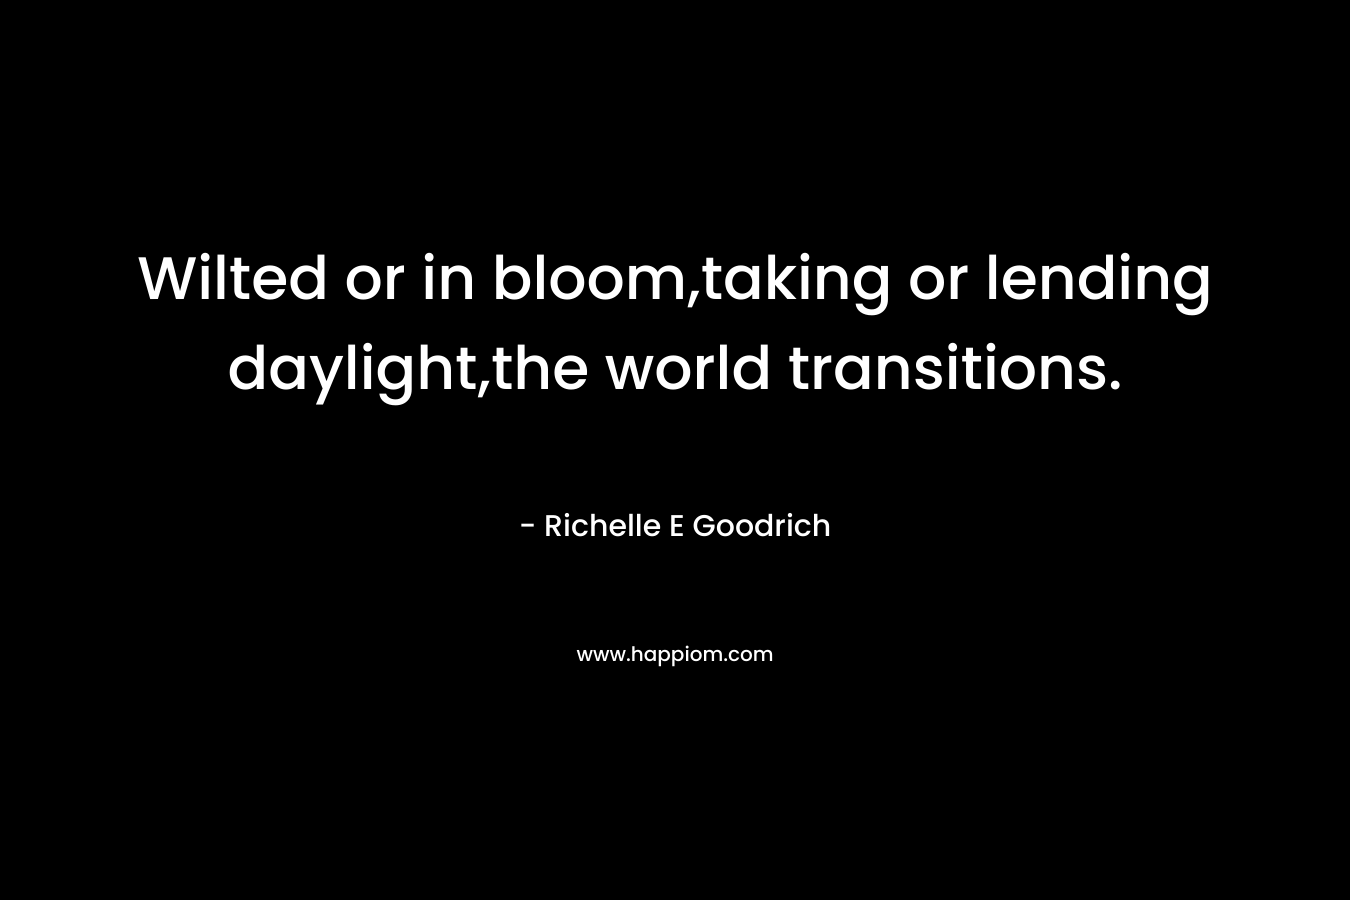 Wilted or in bloom,taking or lending daylight,the world transitions. – Richelle E Goodrich